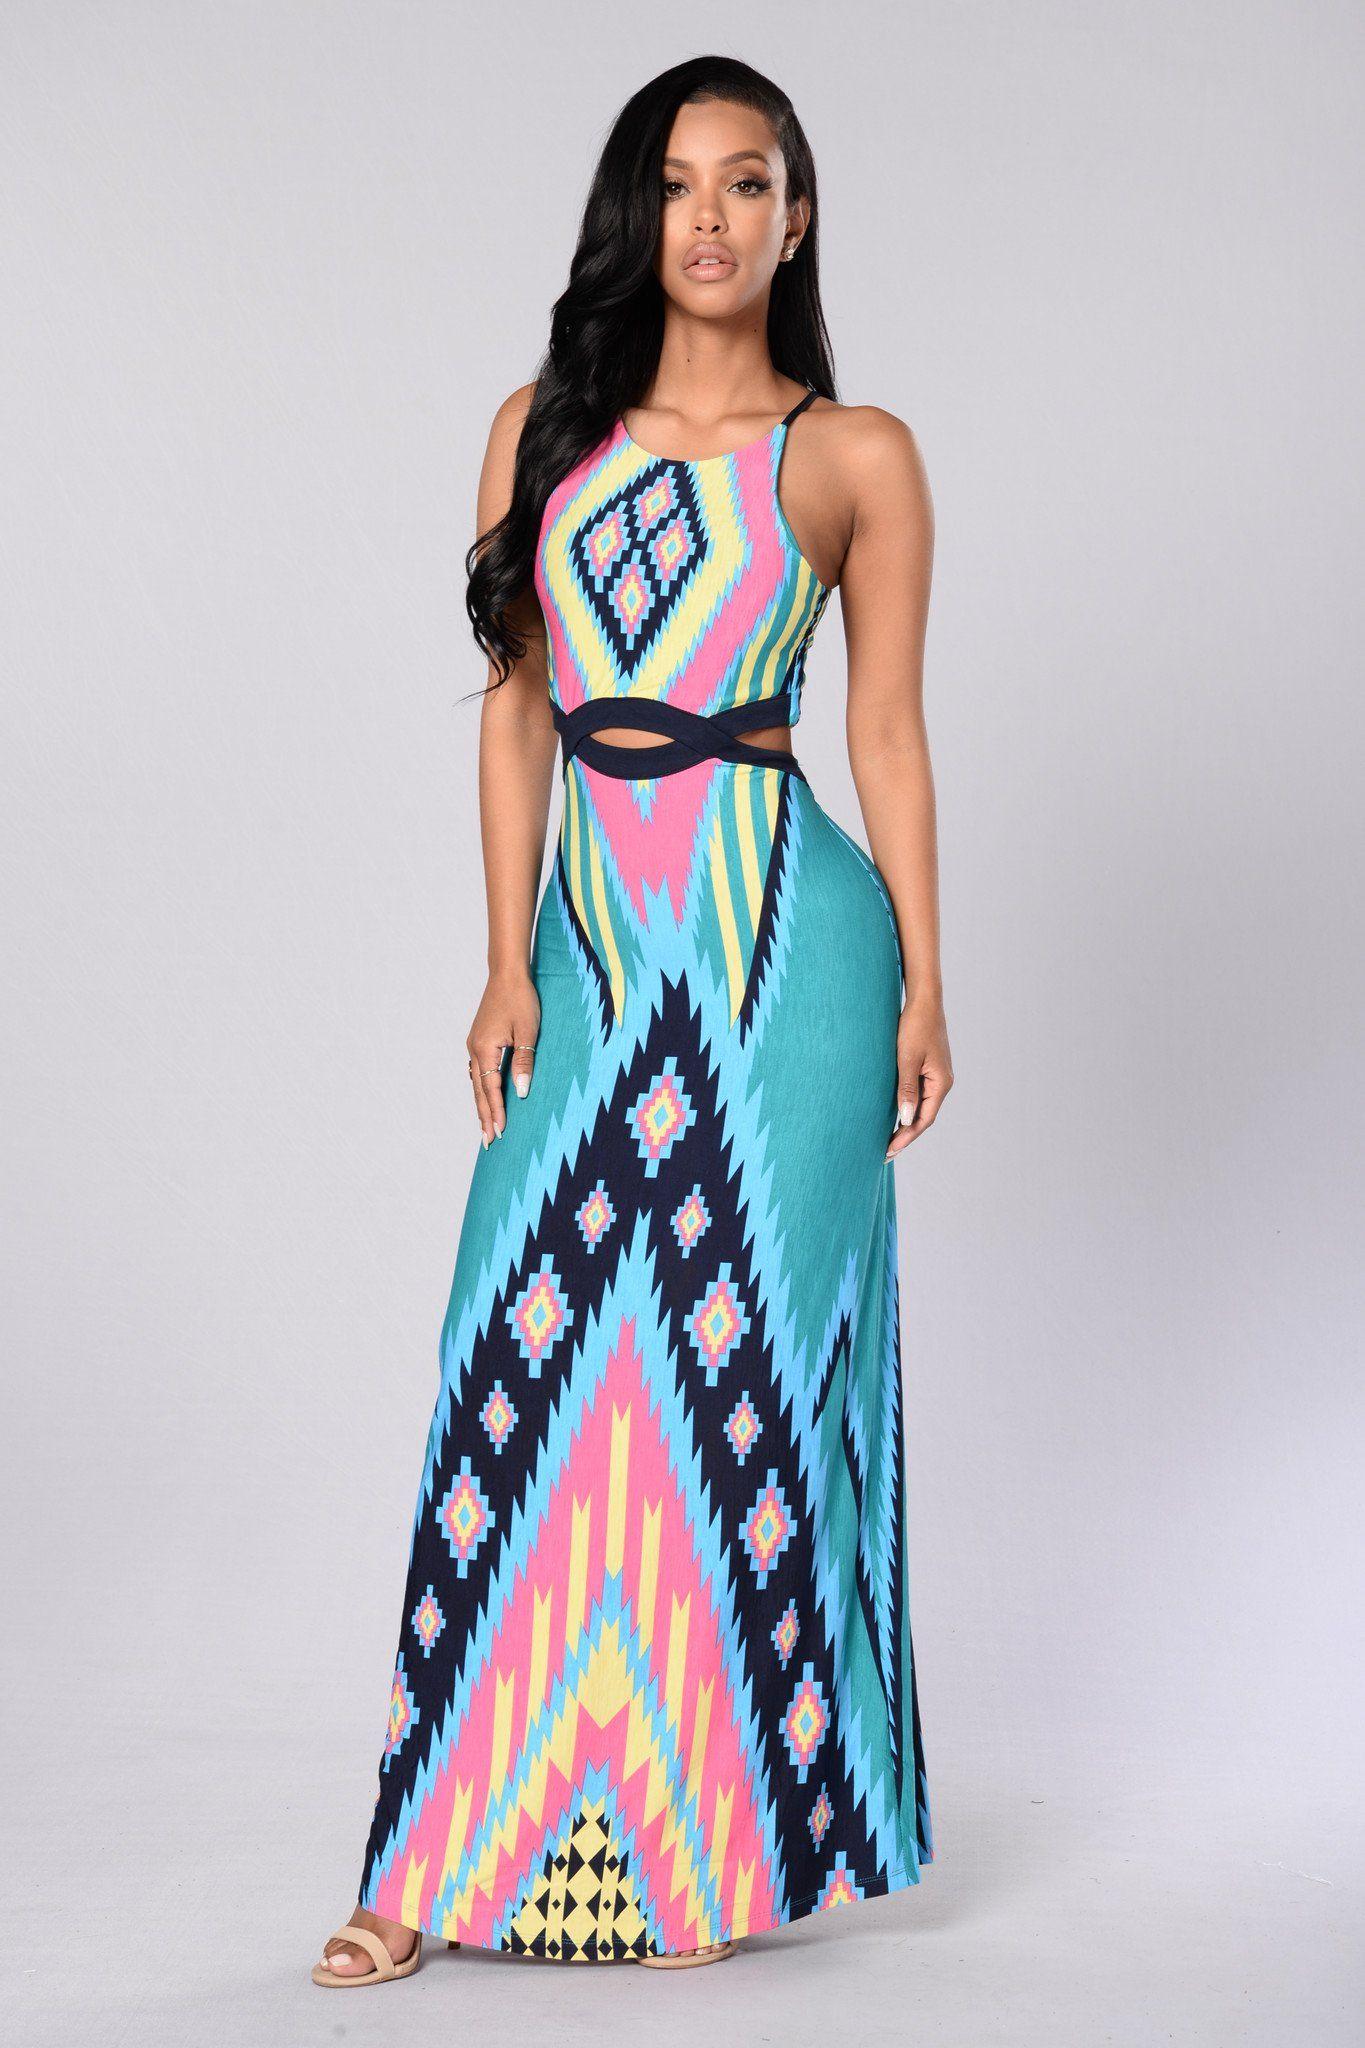 image for plus size dresses express shipping hot0shopdiscountbuy.gq